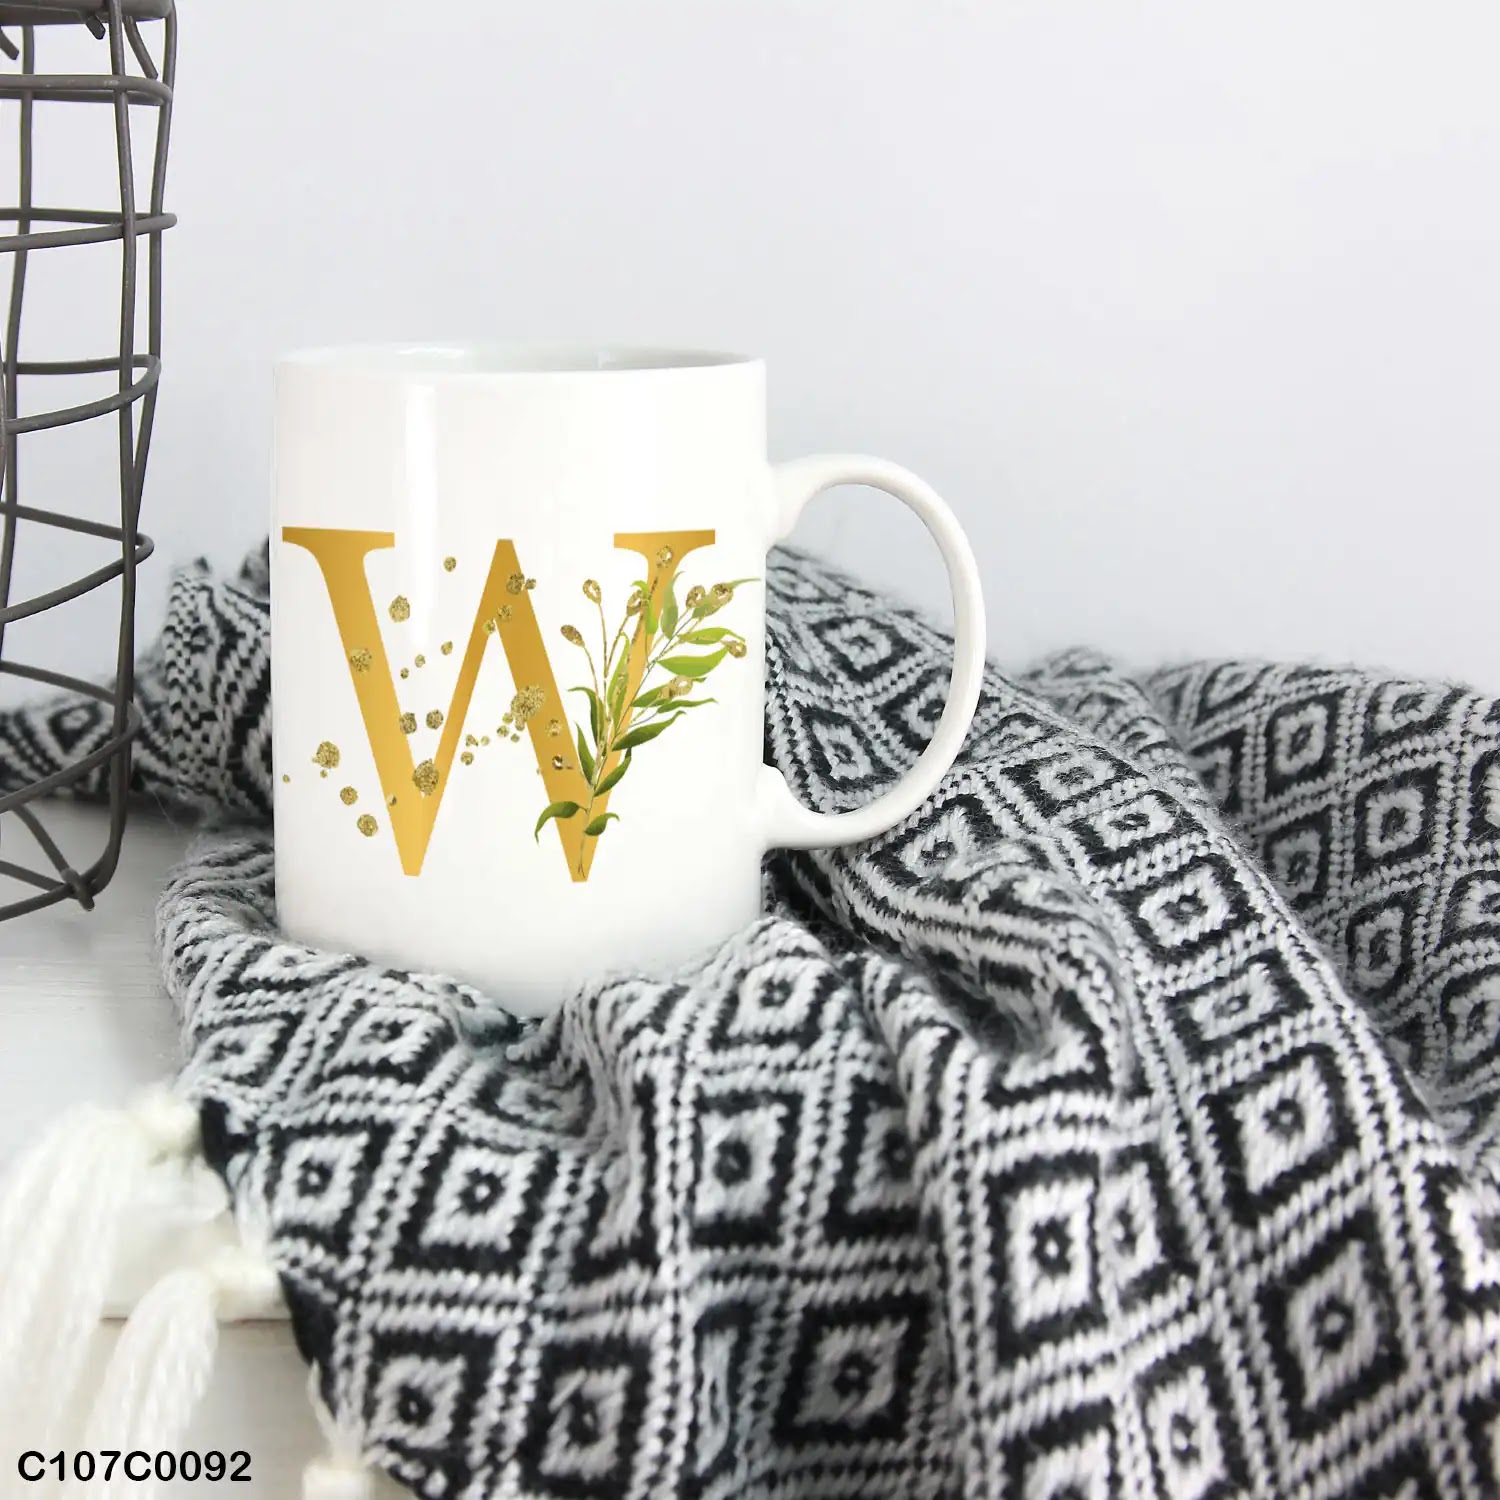 A white mug (cup) printed with gold Letter "W"and small green branch